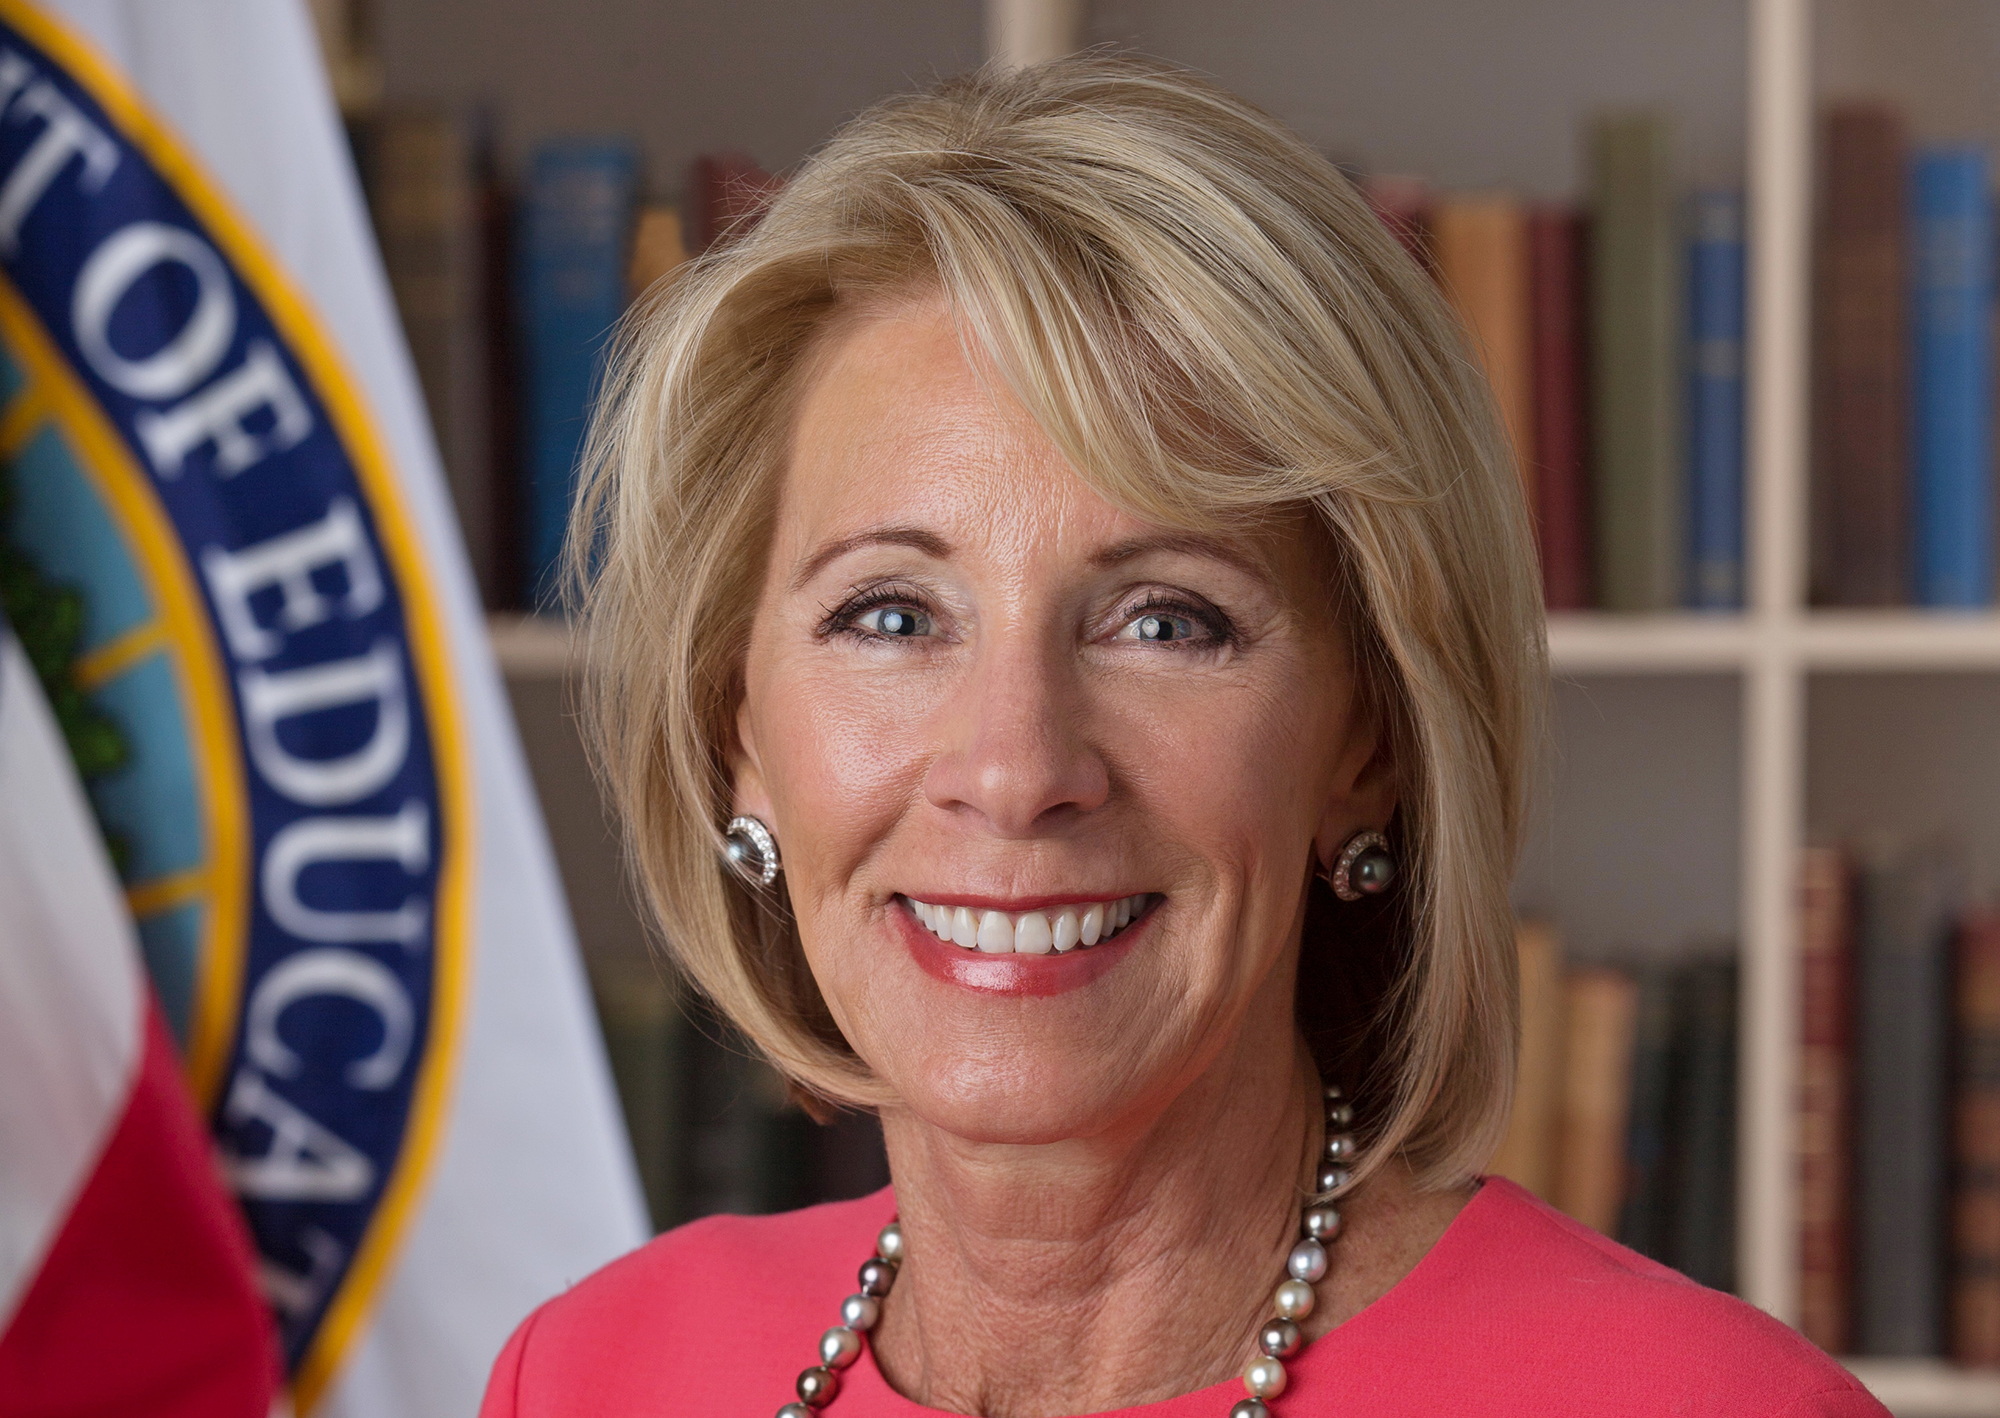 Education Secretary Betsy DeVos “Resets” Rules On For-Profit Colleges